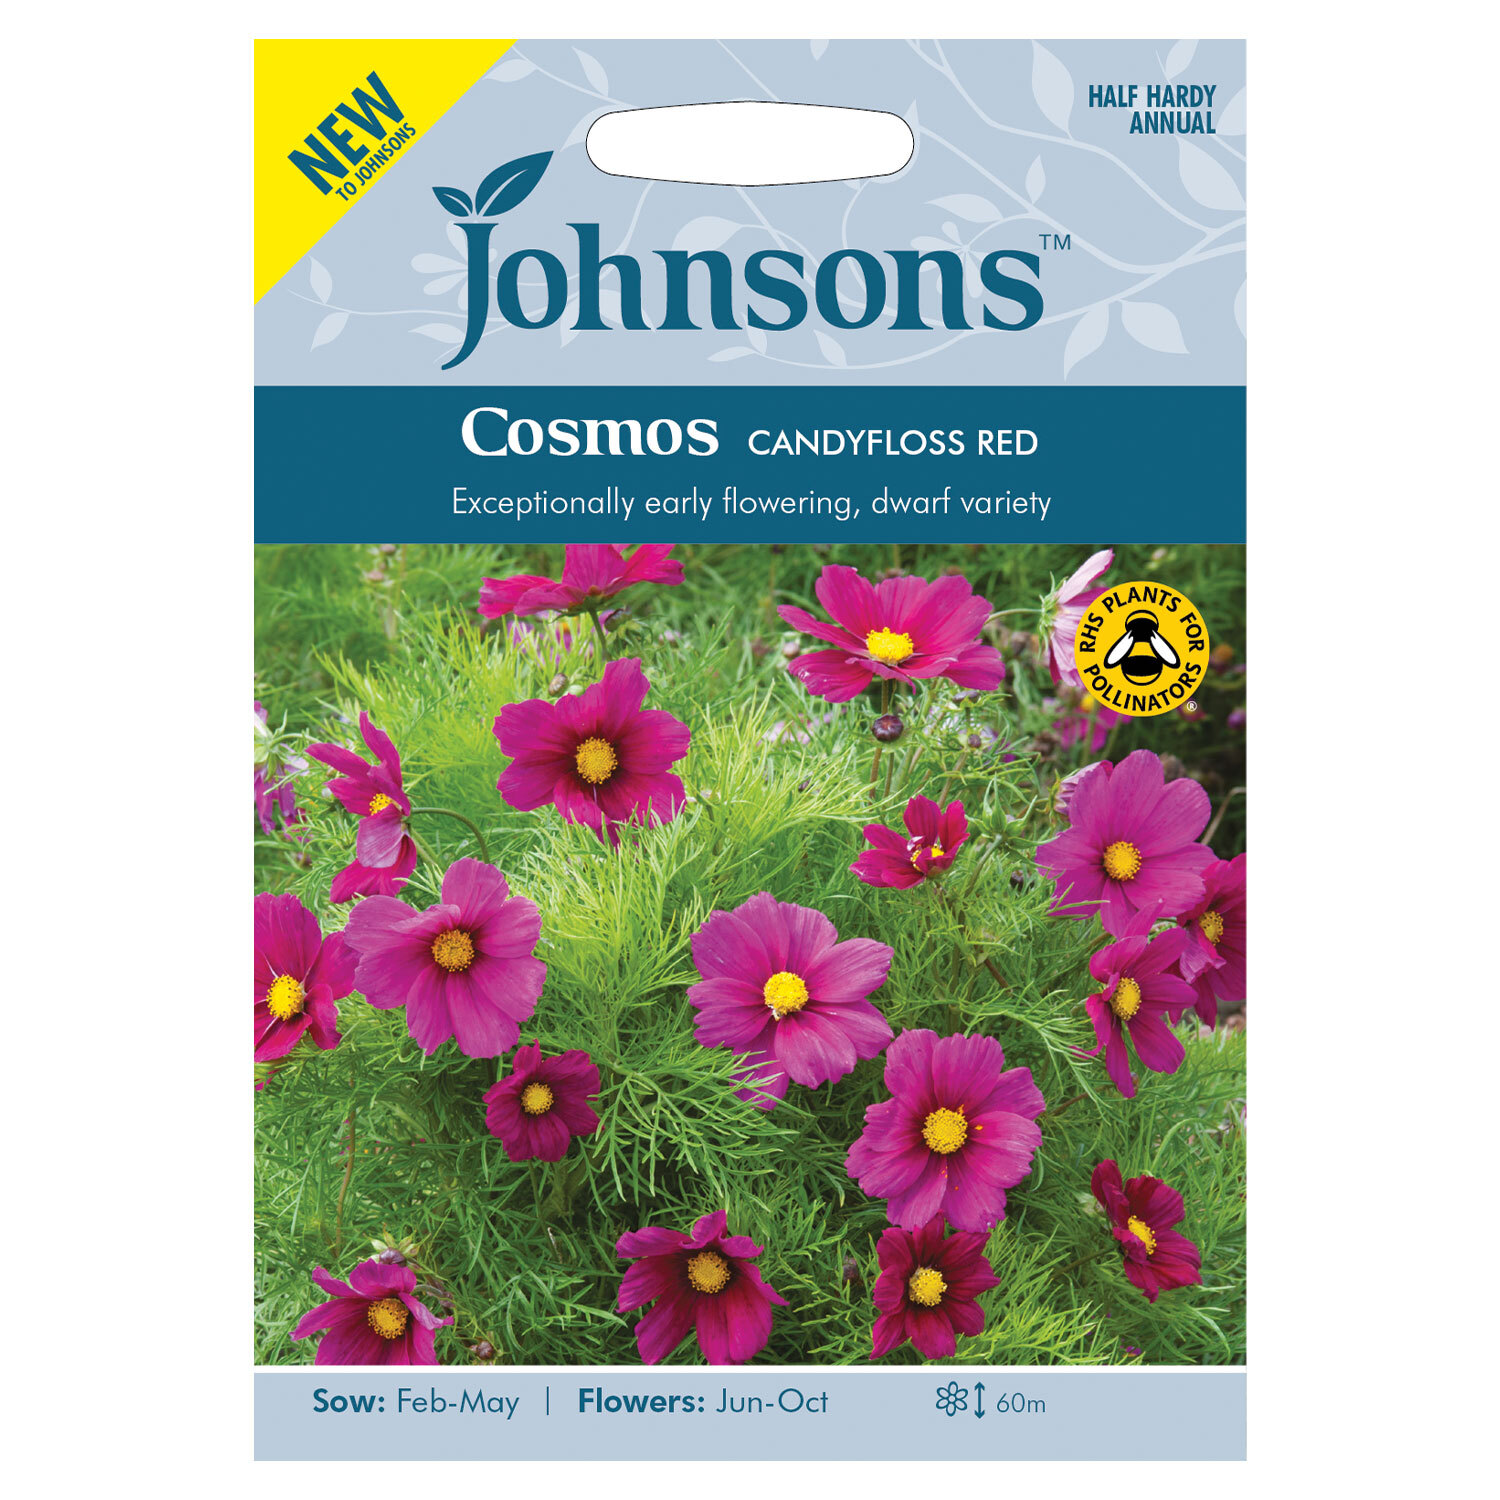 Johnsons Cosmos Candyfloss Red Flower Seeds Image 2